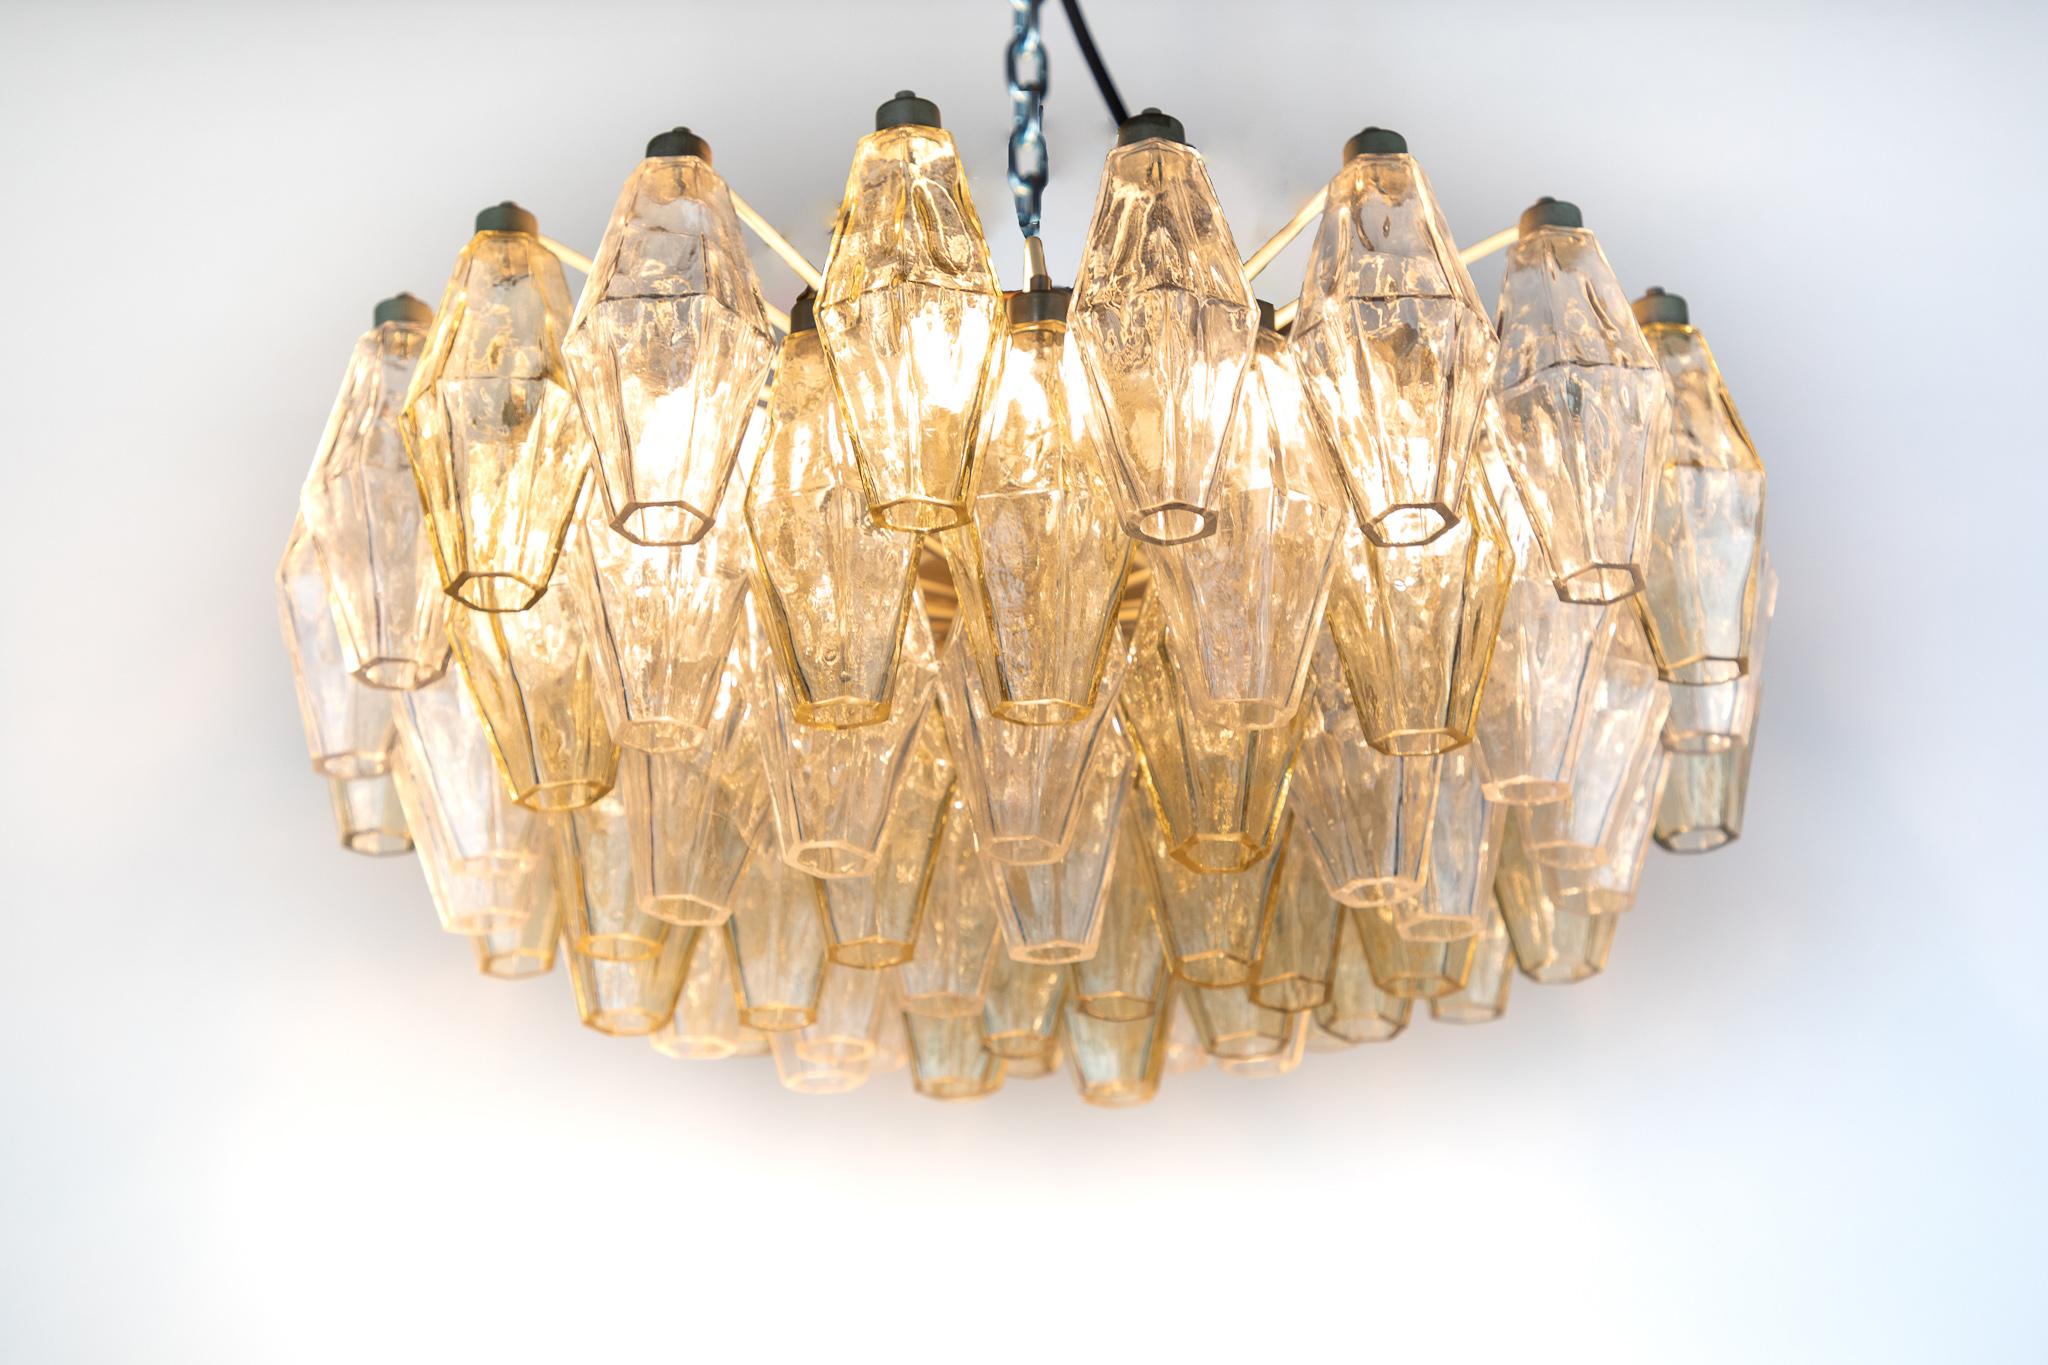 Italian Mid-Century Modern polyhedral murano glass chandelier Carlo Scarpa, 1950s

Italian mid-century glass ceiling lamp by the famous Italian designer and architect Carlo Scarpa from 1950s. This chandelier features mouth-blown Polyhedral Murano